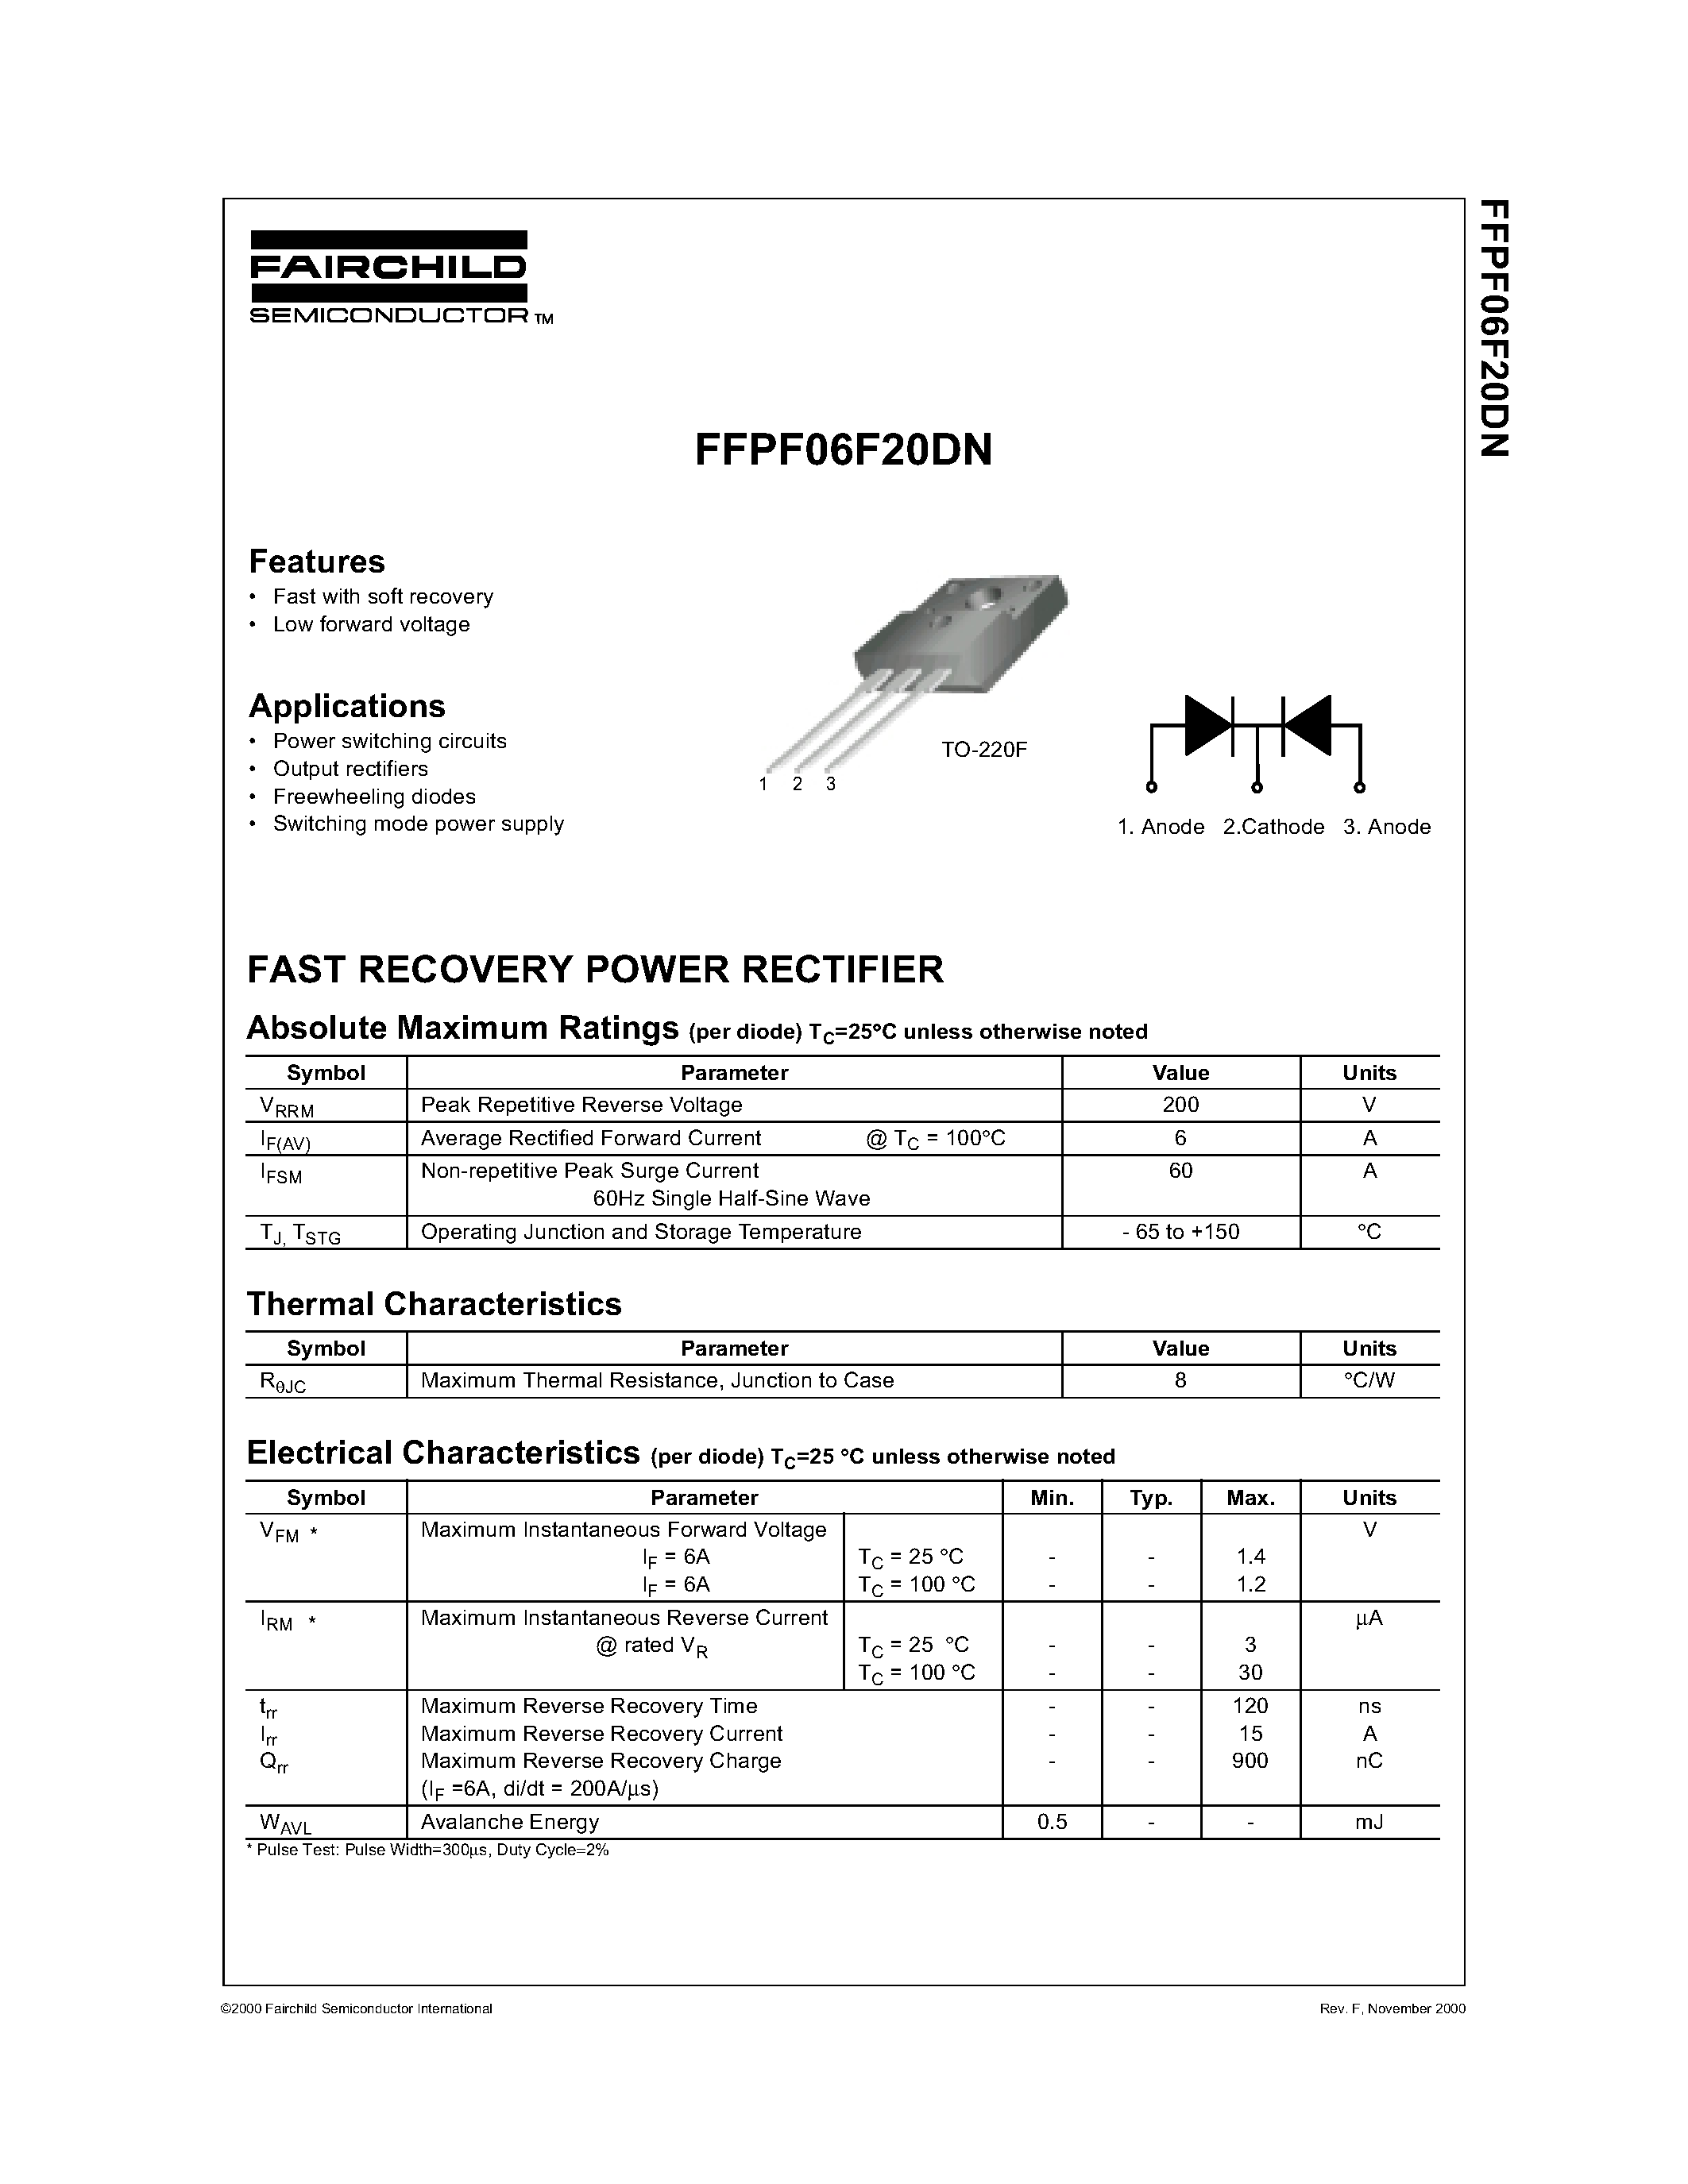 Даташит FFPF06F20DN - FAST RECOVERY POWER RECTIFIER страница 1